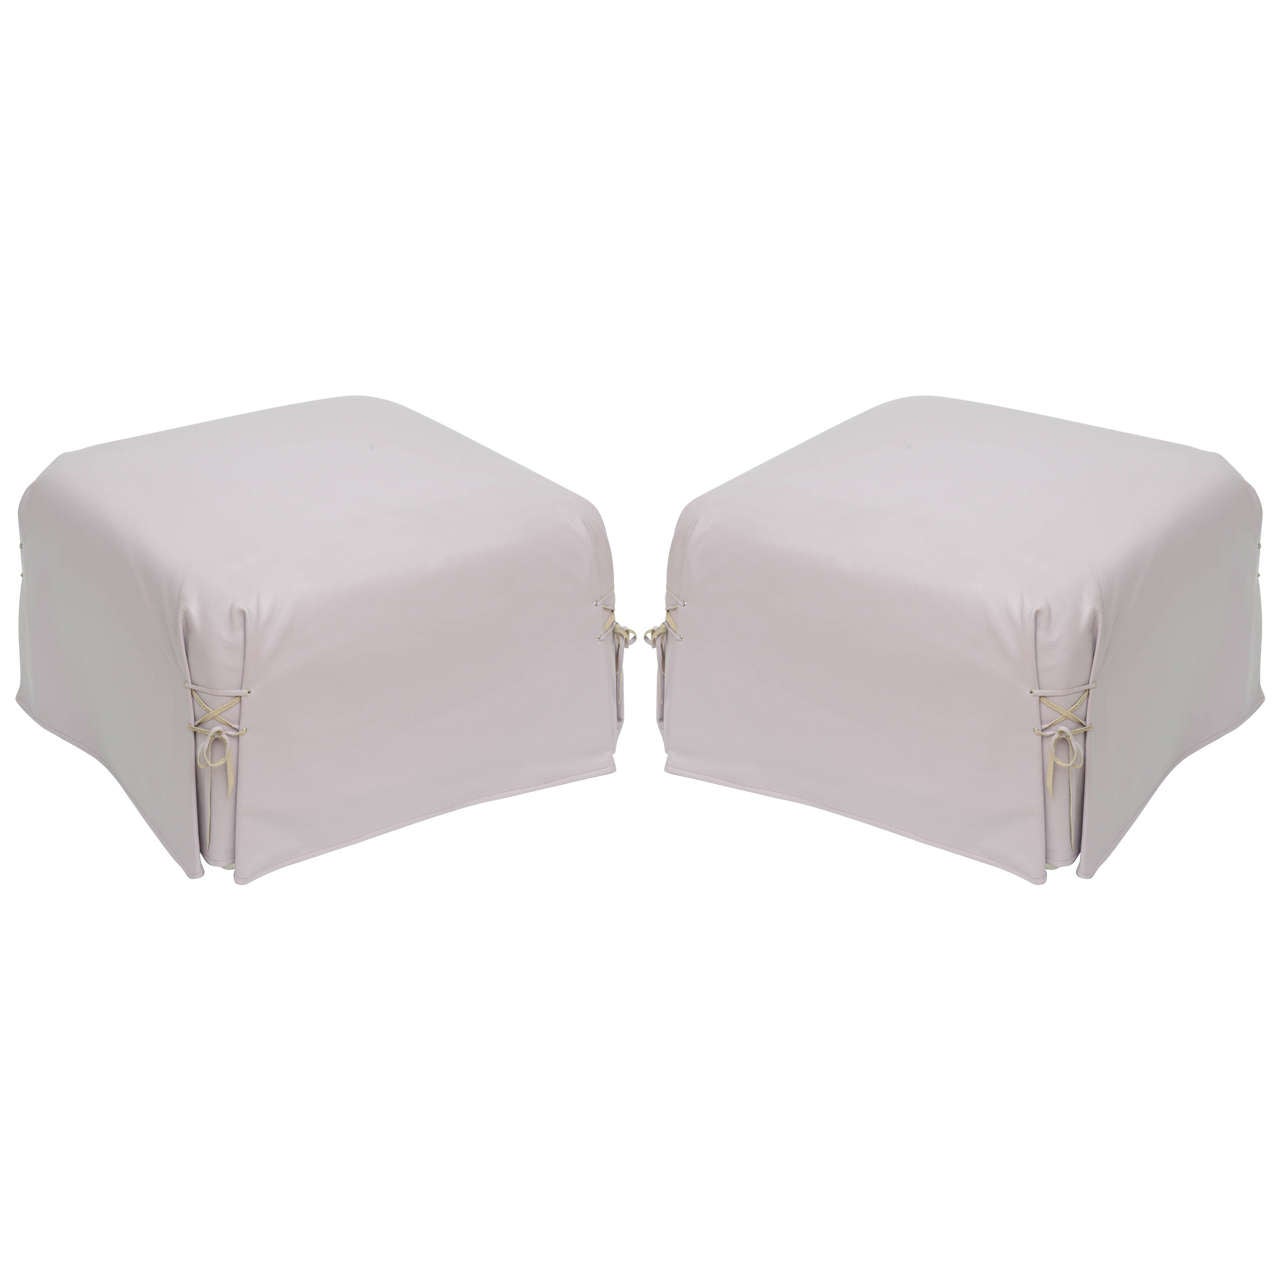 Pair of Lavender Leather Shoelace Ottomans by John Saladino